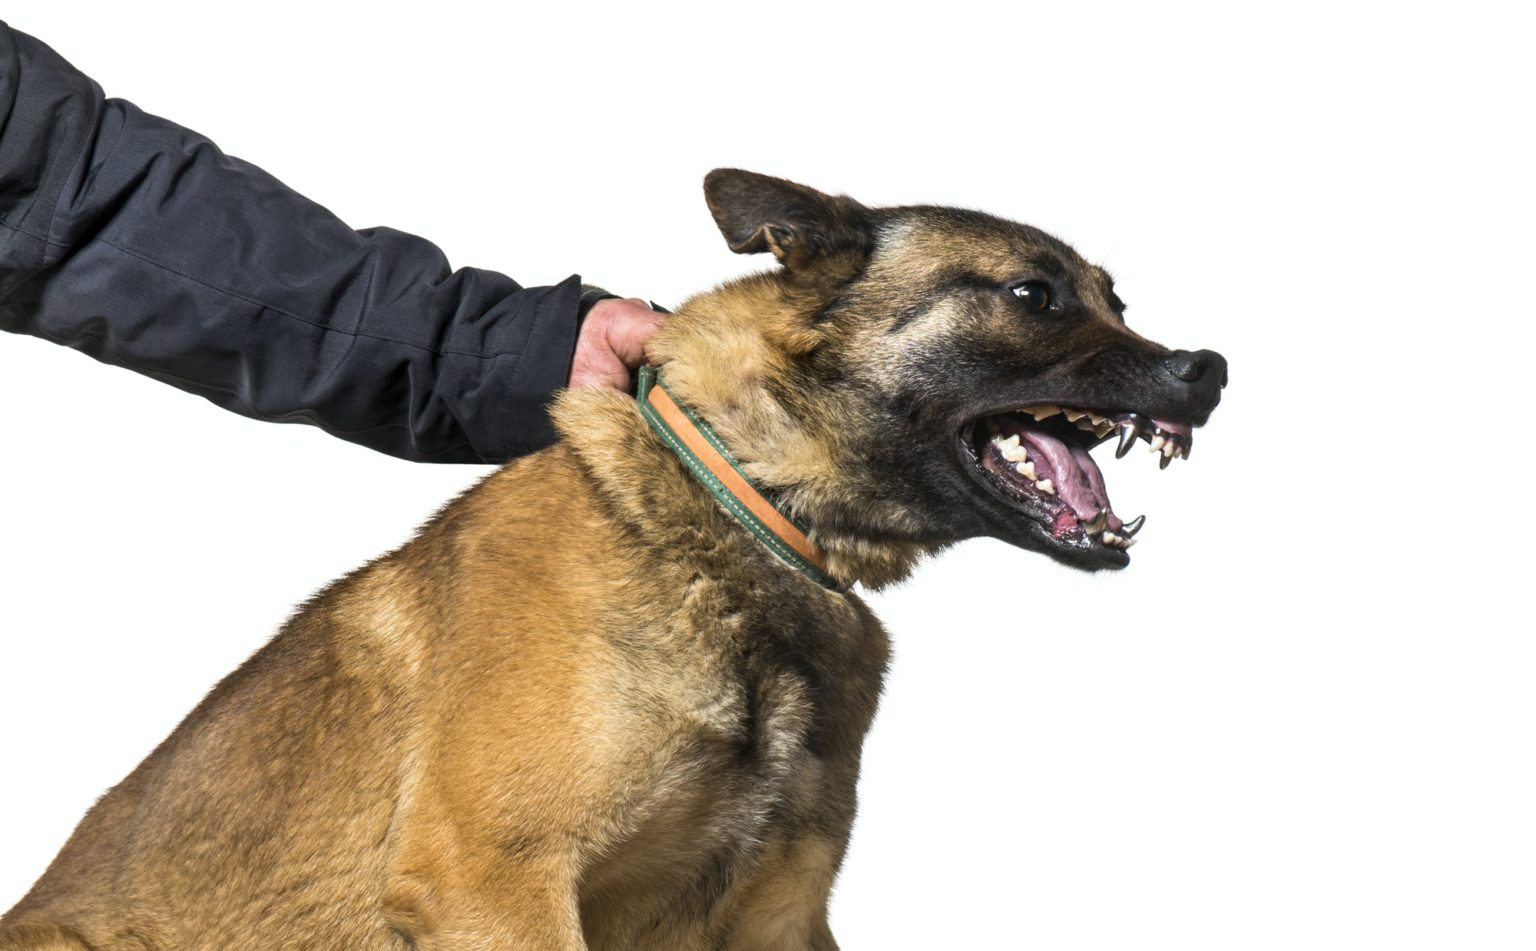 Man holding collar and leash of Malinois with steel teeth against white background